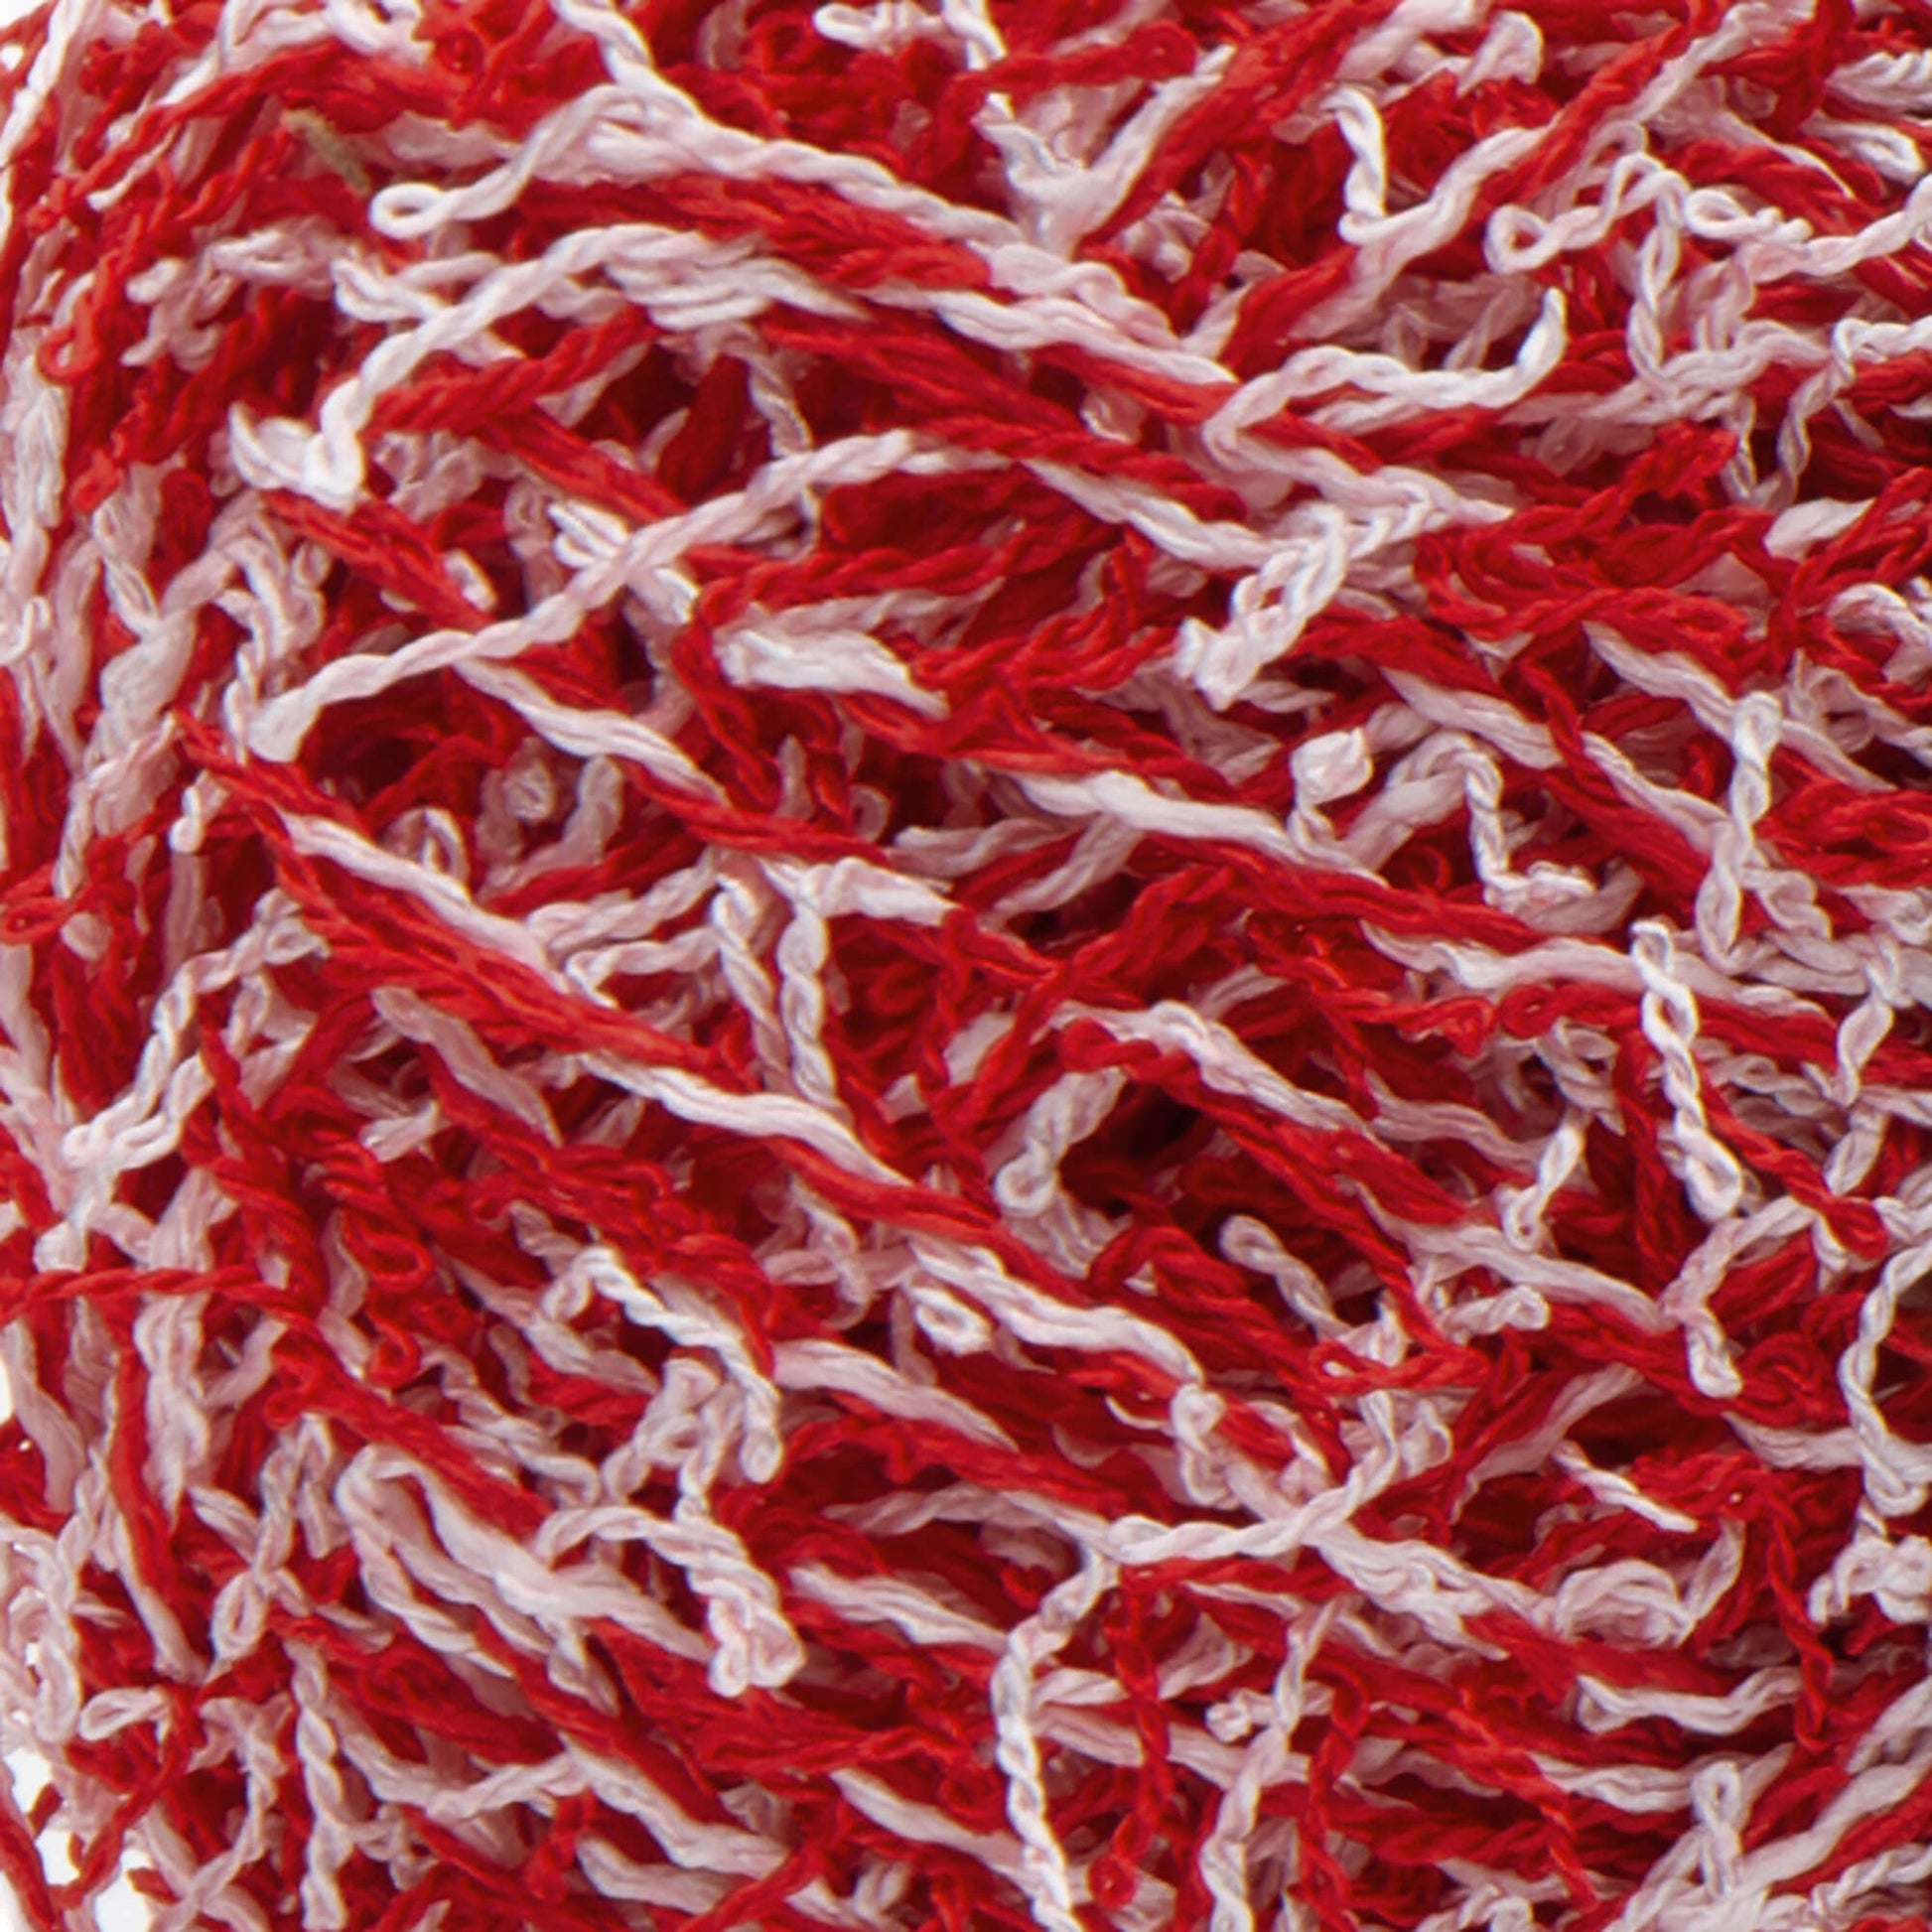 Red Heart Scrubby Yarn - Discontinued shades